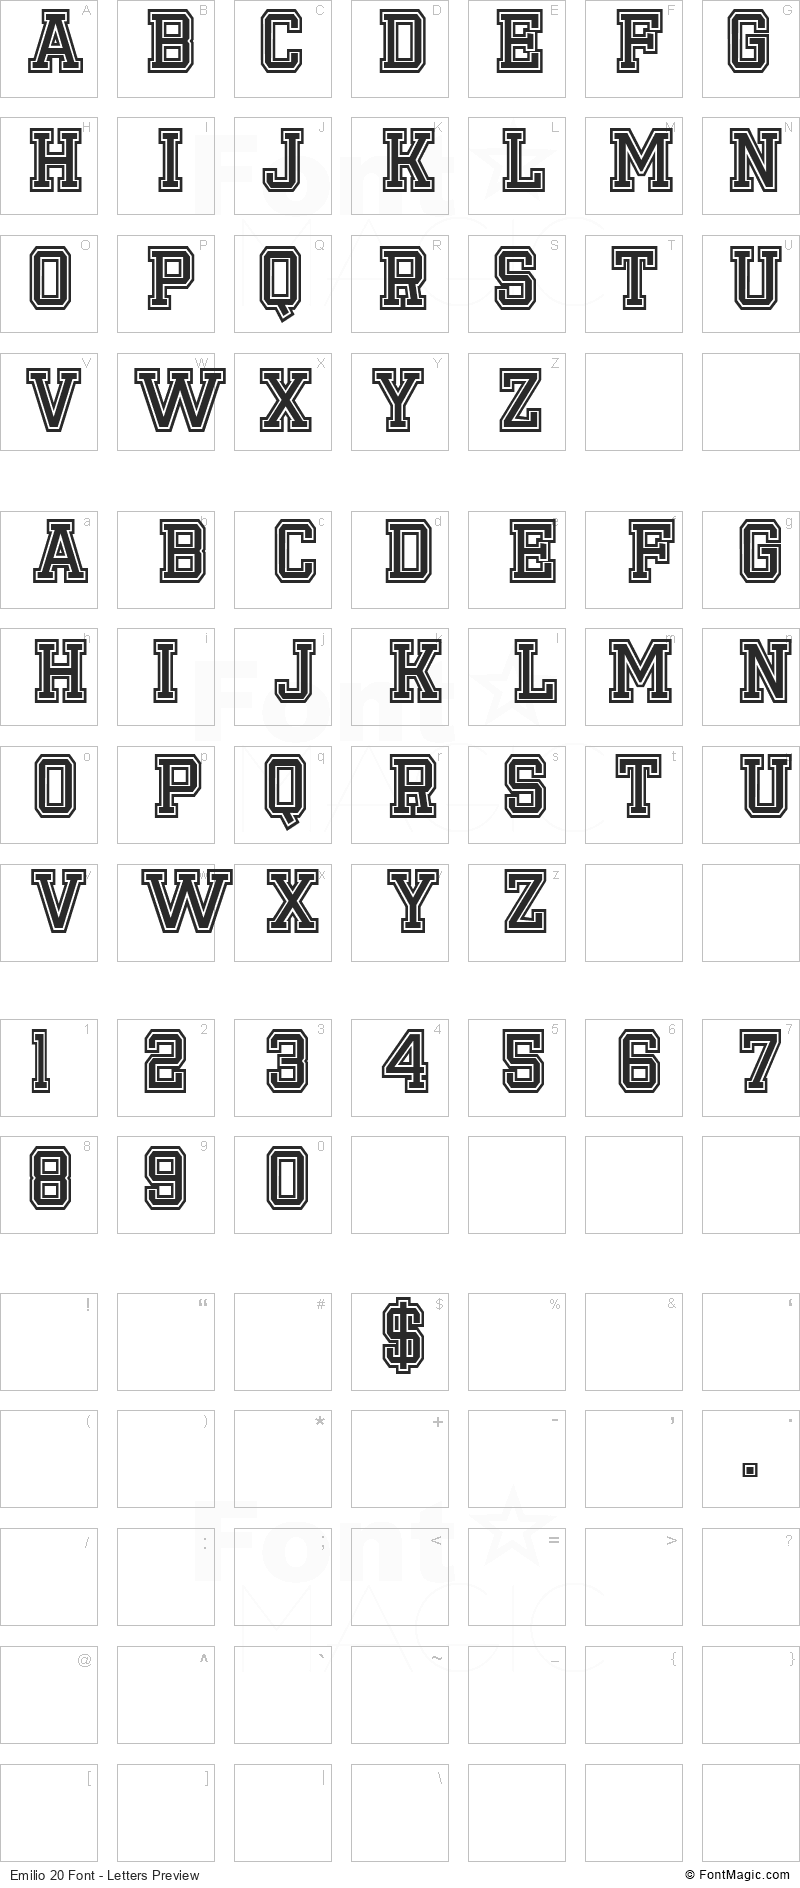 Emilio 20 Font - All Latters Preview Chart